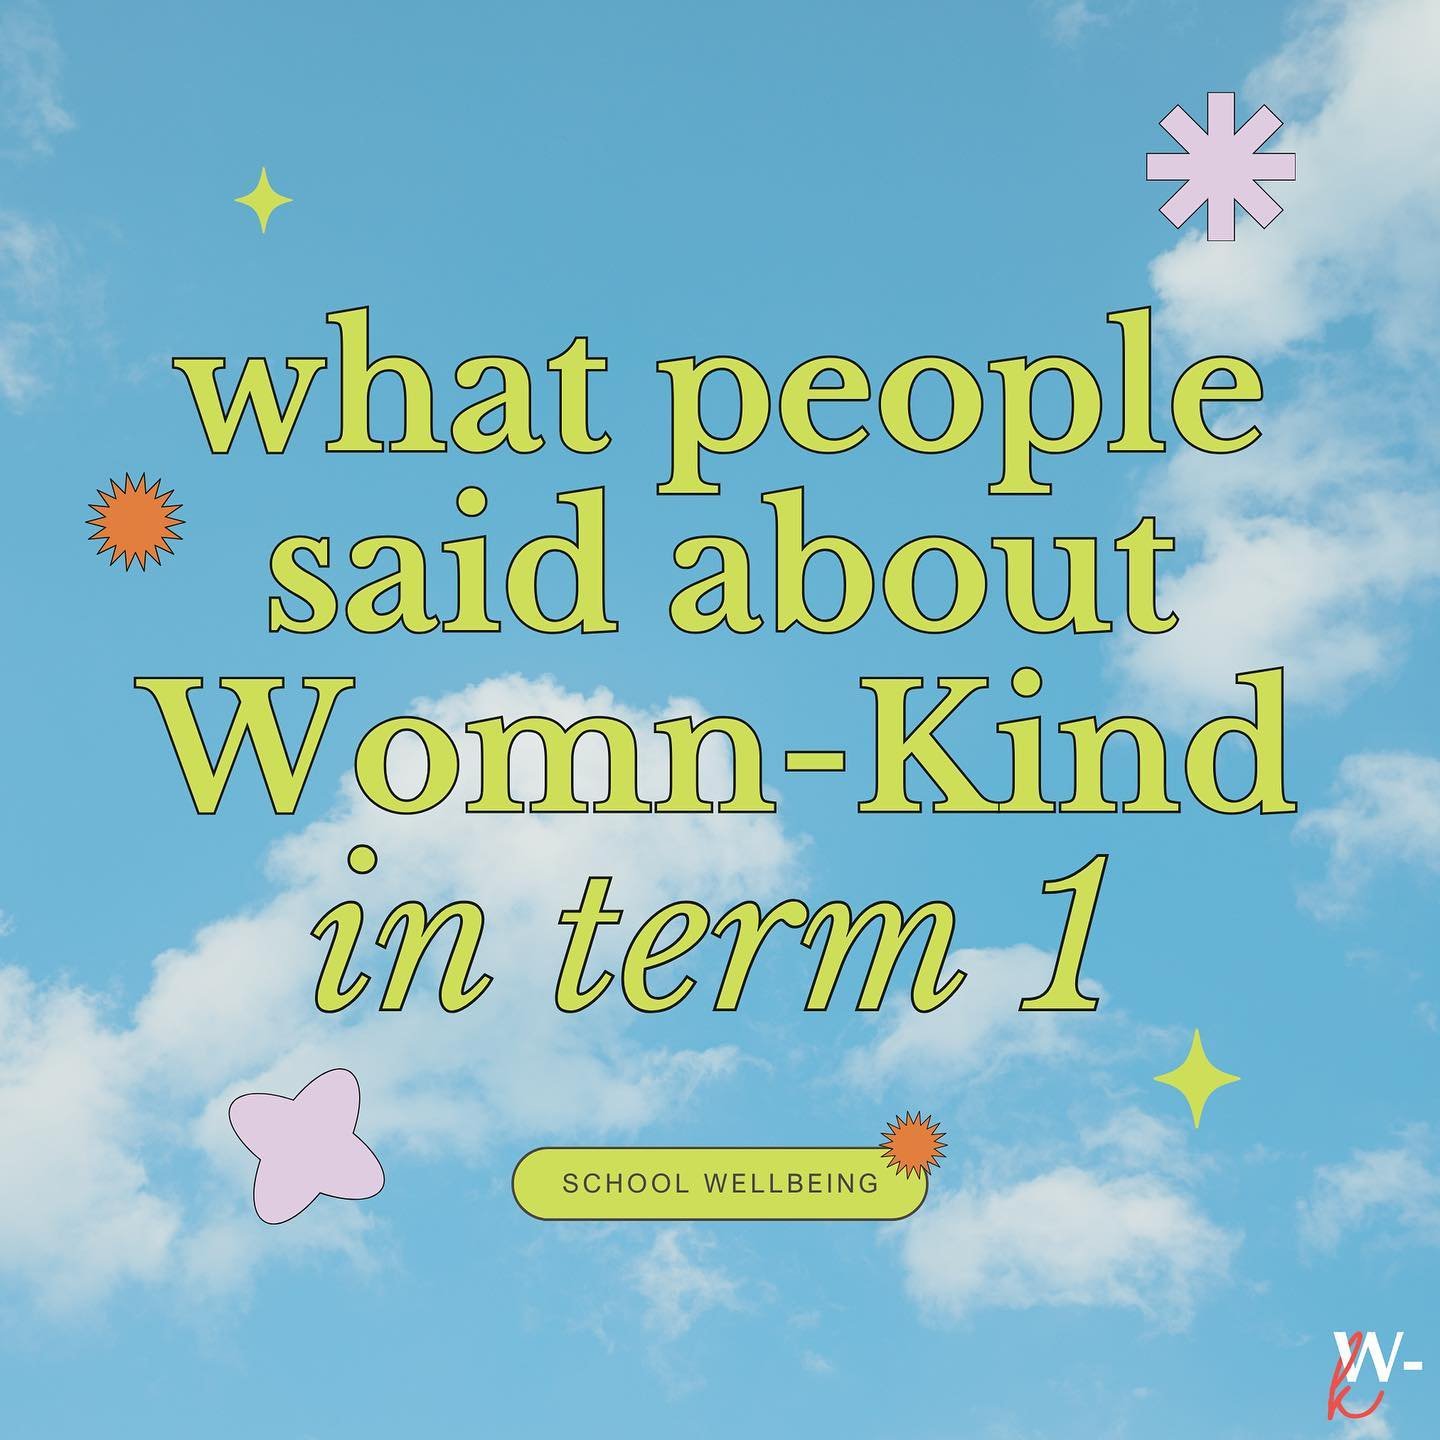 It&rsquo;s been a huge term for Womn-Kind🚀And we&rsquo;ve loved every minute of it!!

If you want Womn-Kind to come to your school:
💌dm us your school name and we&rsquo;ll email them
🧑🏻&zwj;🏫talk to your teachers about Womn-Kind
📣tag your schoo